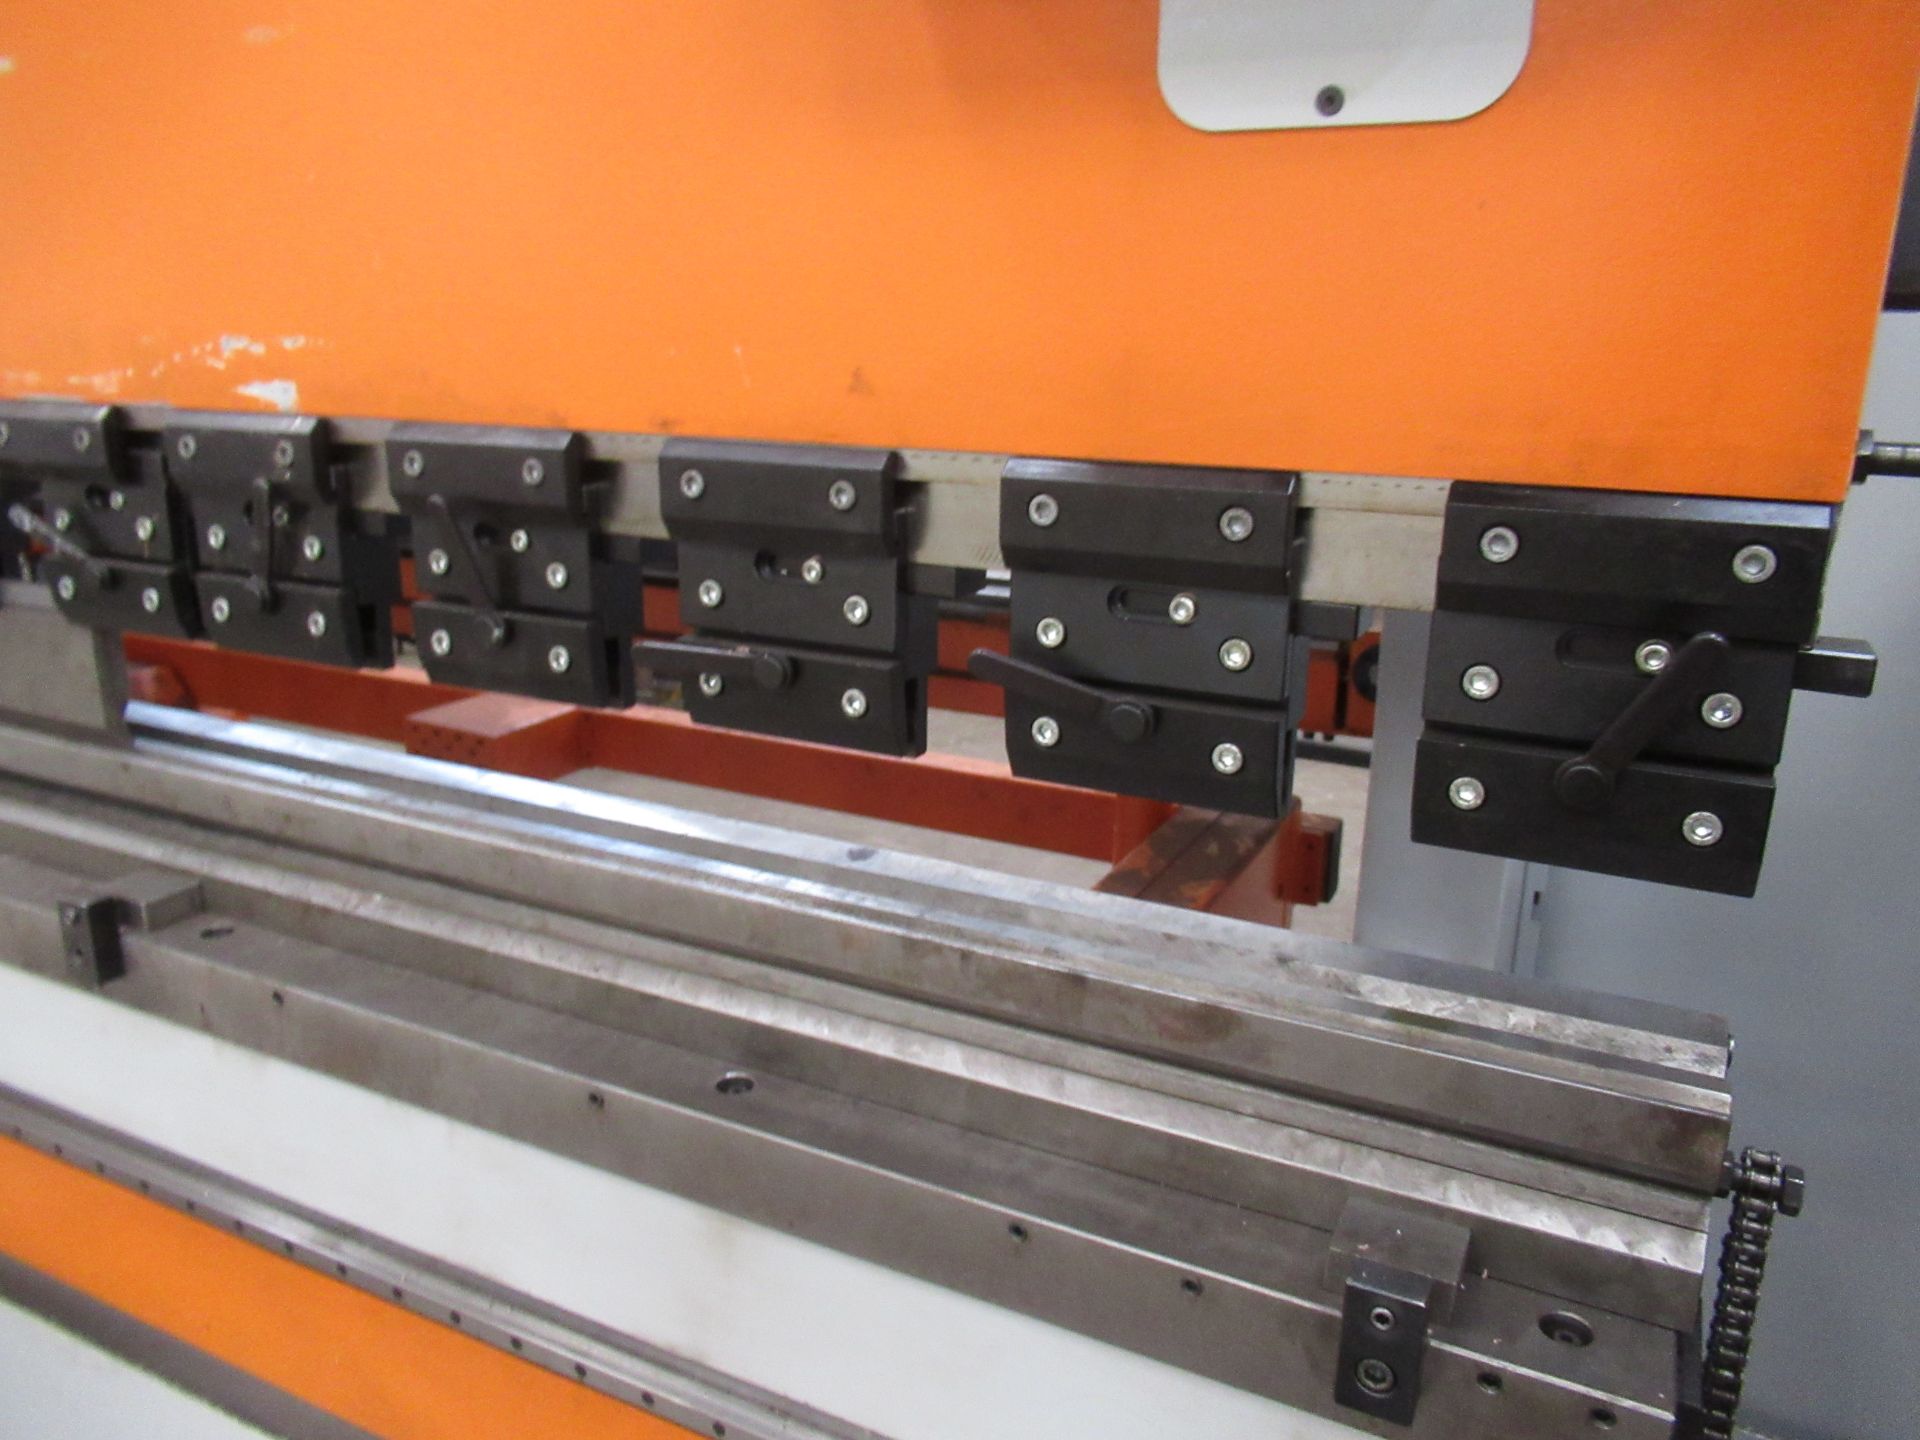 Ermaksan Speed-bend Pro 4100 x 220 CNC Hydraulic Press Brake and a selection of tooling for press br - Image 9 of 16